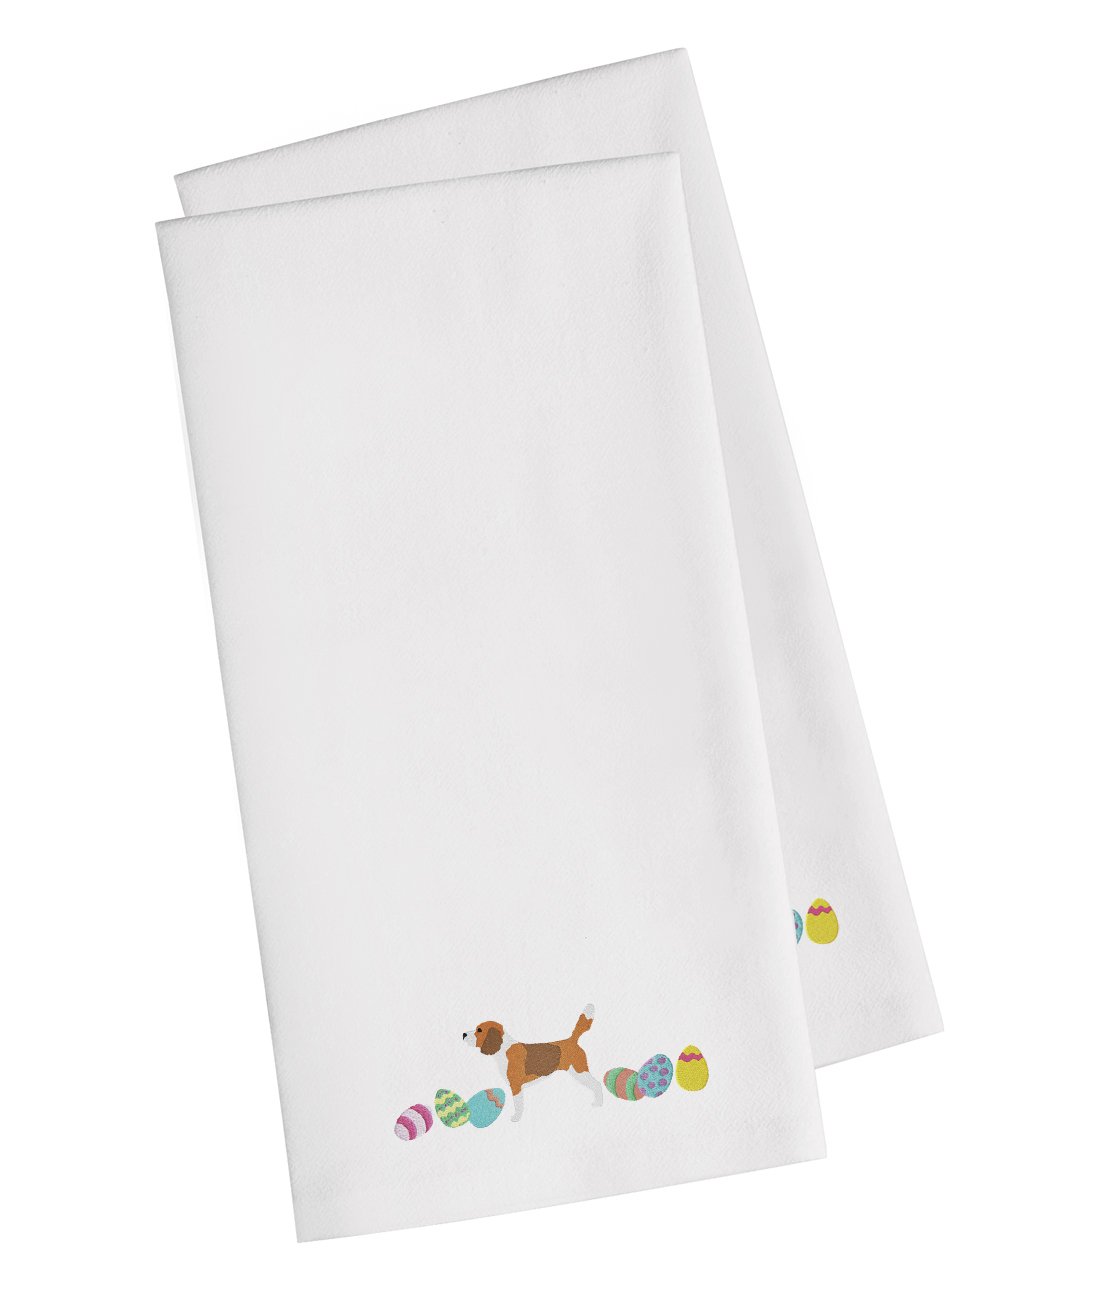 Beagle Easter White Embroidered Kitchen Towel Set of 2 CK1604WHTWE by Caroline's Treasures